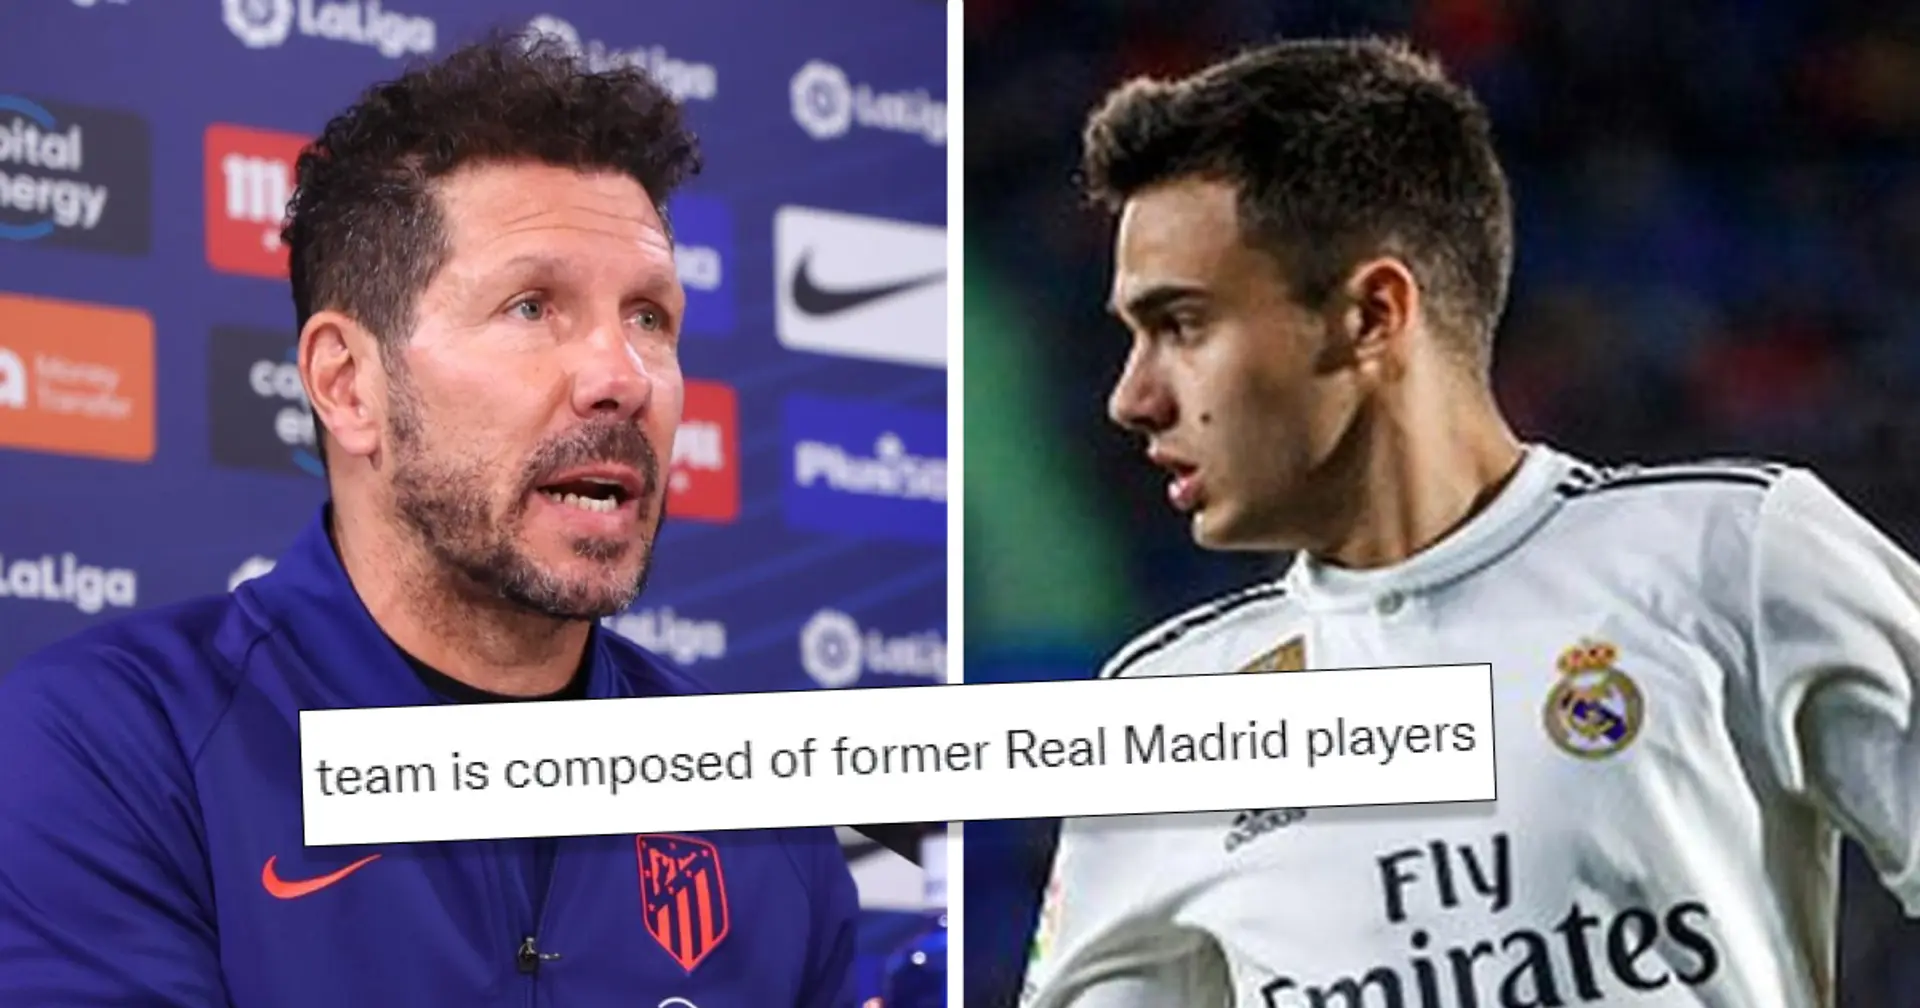 Simeone reacts as sixth ex-Real Madrid player in recent history set to join Atletico – fans tell him same thing